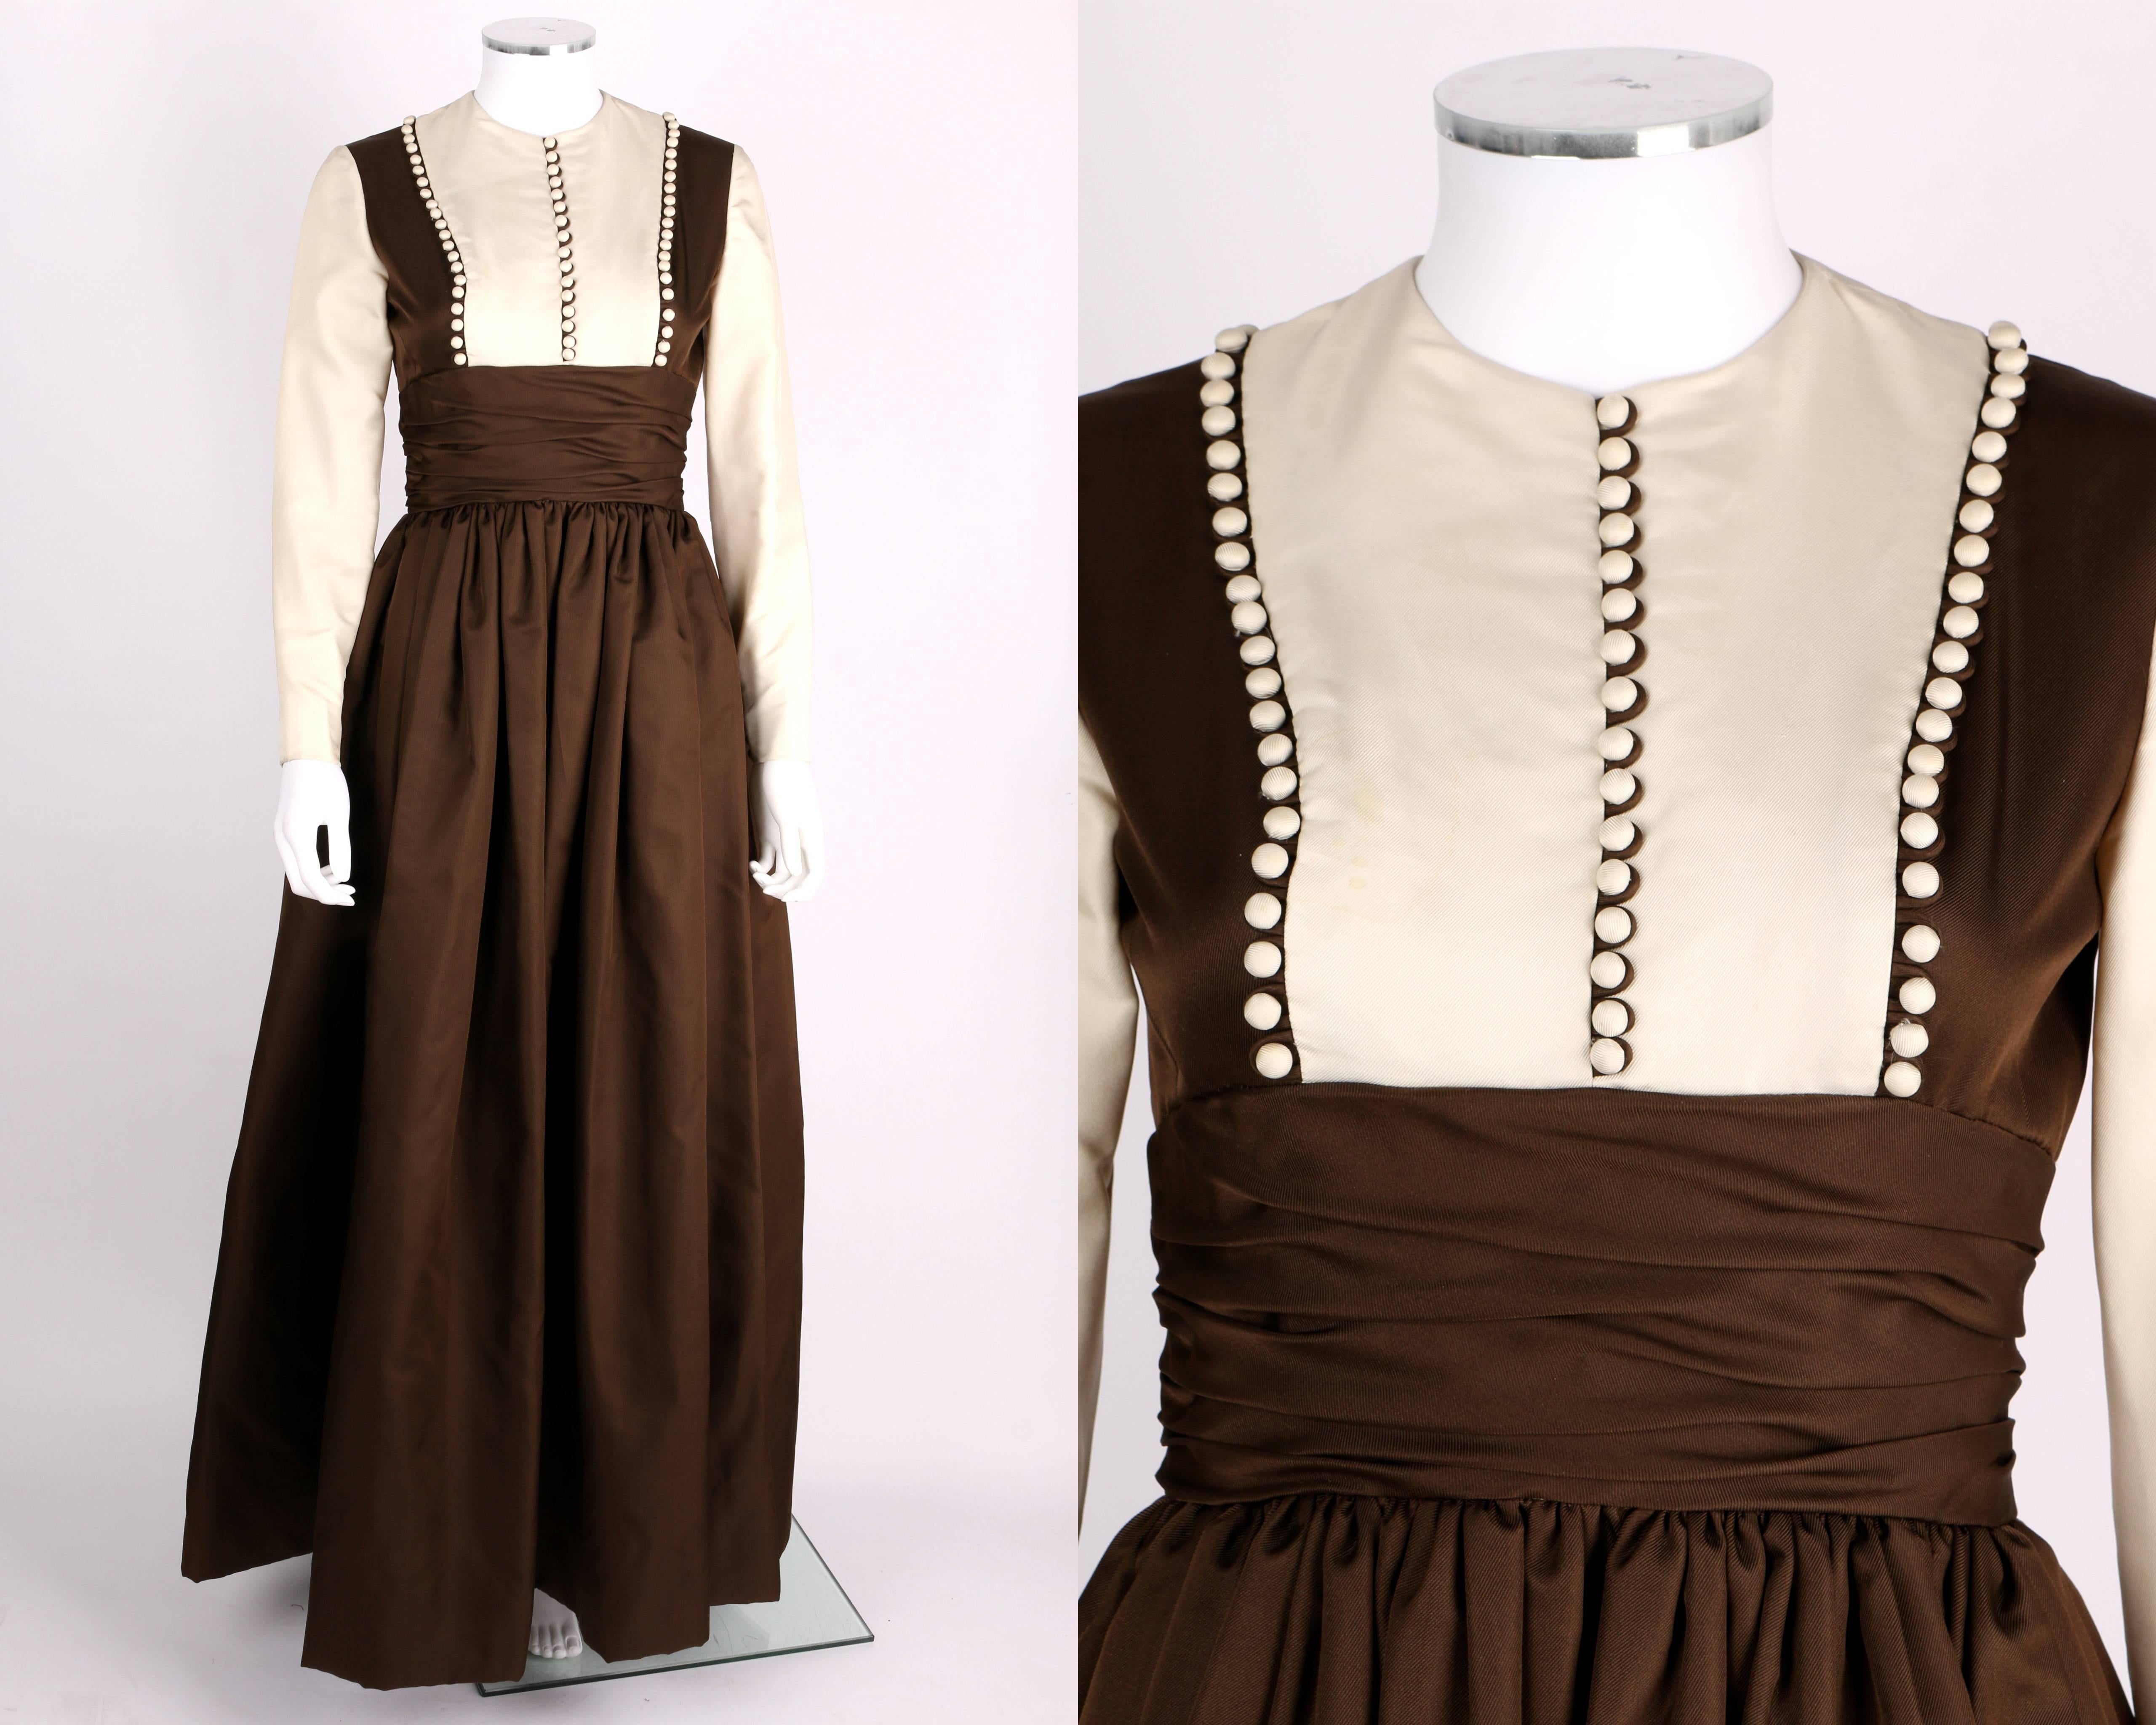 Vintage Fall-Winter 1968 Geoffrey Beene evening dress. Dress was purchased at Bergdorf Goodman on the Plaza New York and is dated November 21, 1968 on interior tag. Dress is ivory and brown silk faille. Vest-like bodice with button detail at pleated